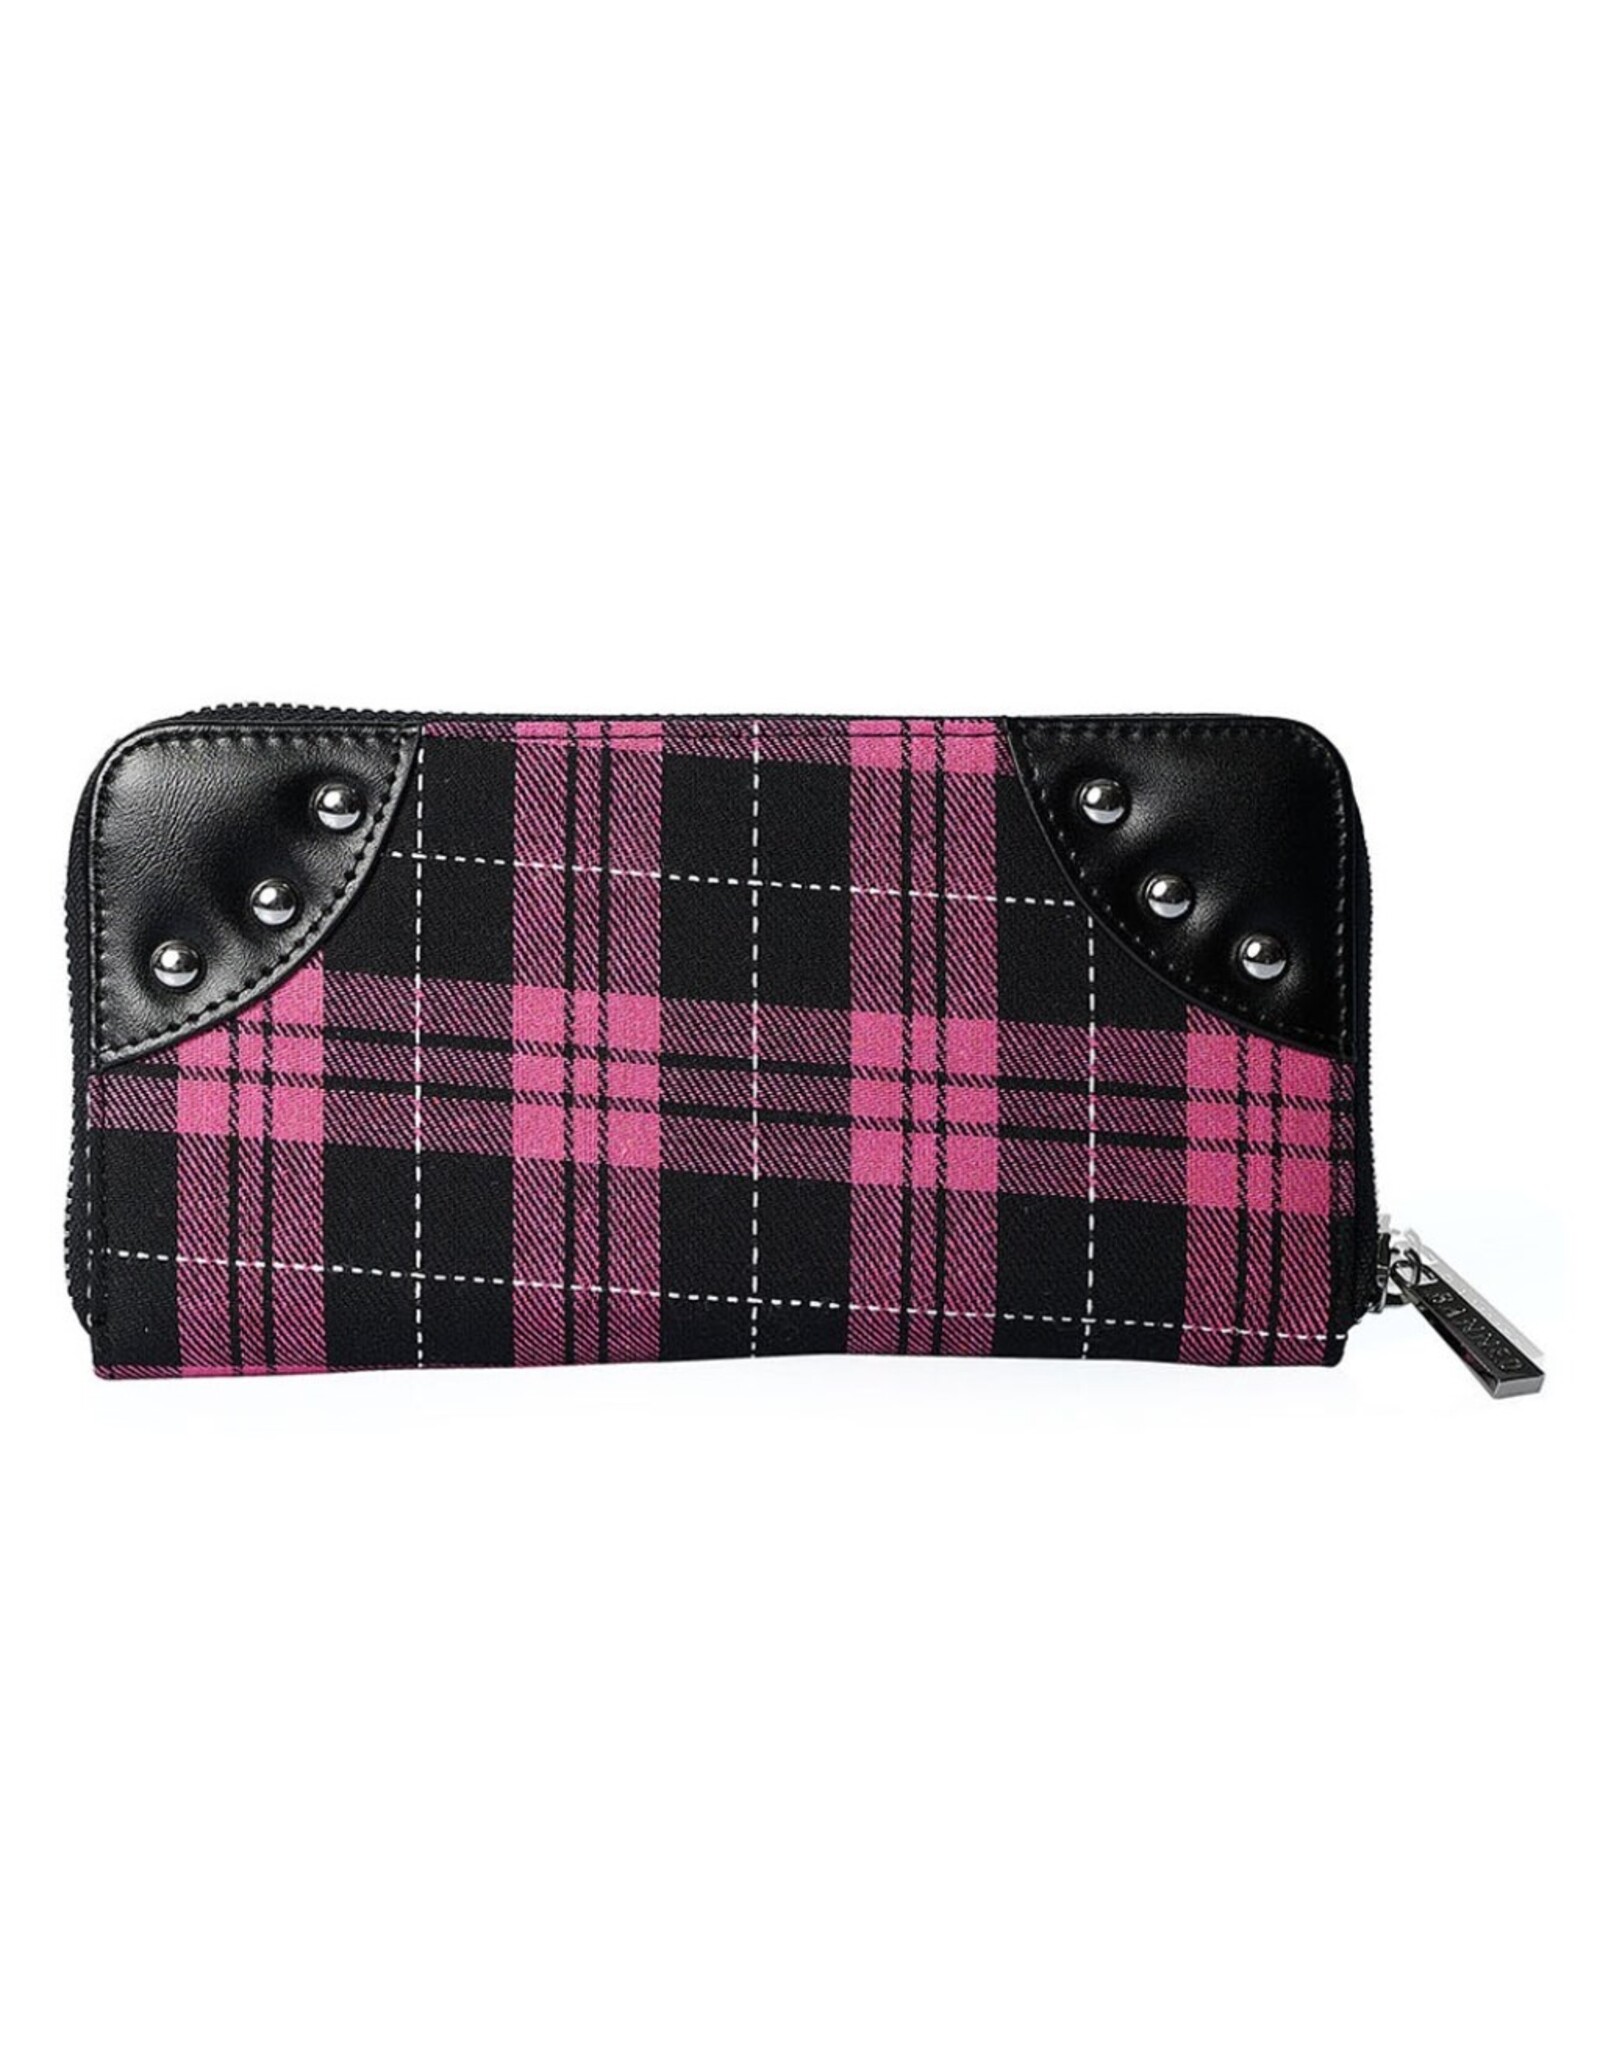 Banned Gothic wallets and Purses - Tartan Wallet with Handcuffs (pink)